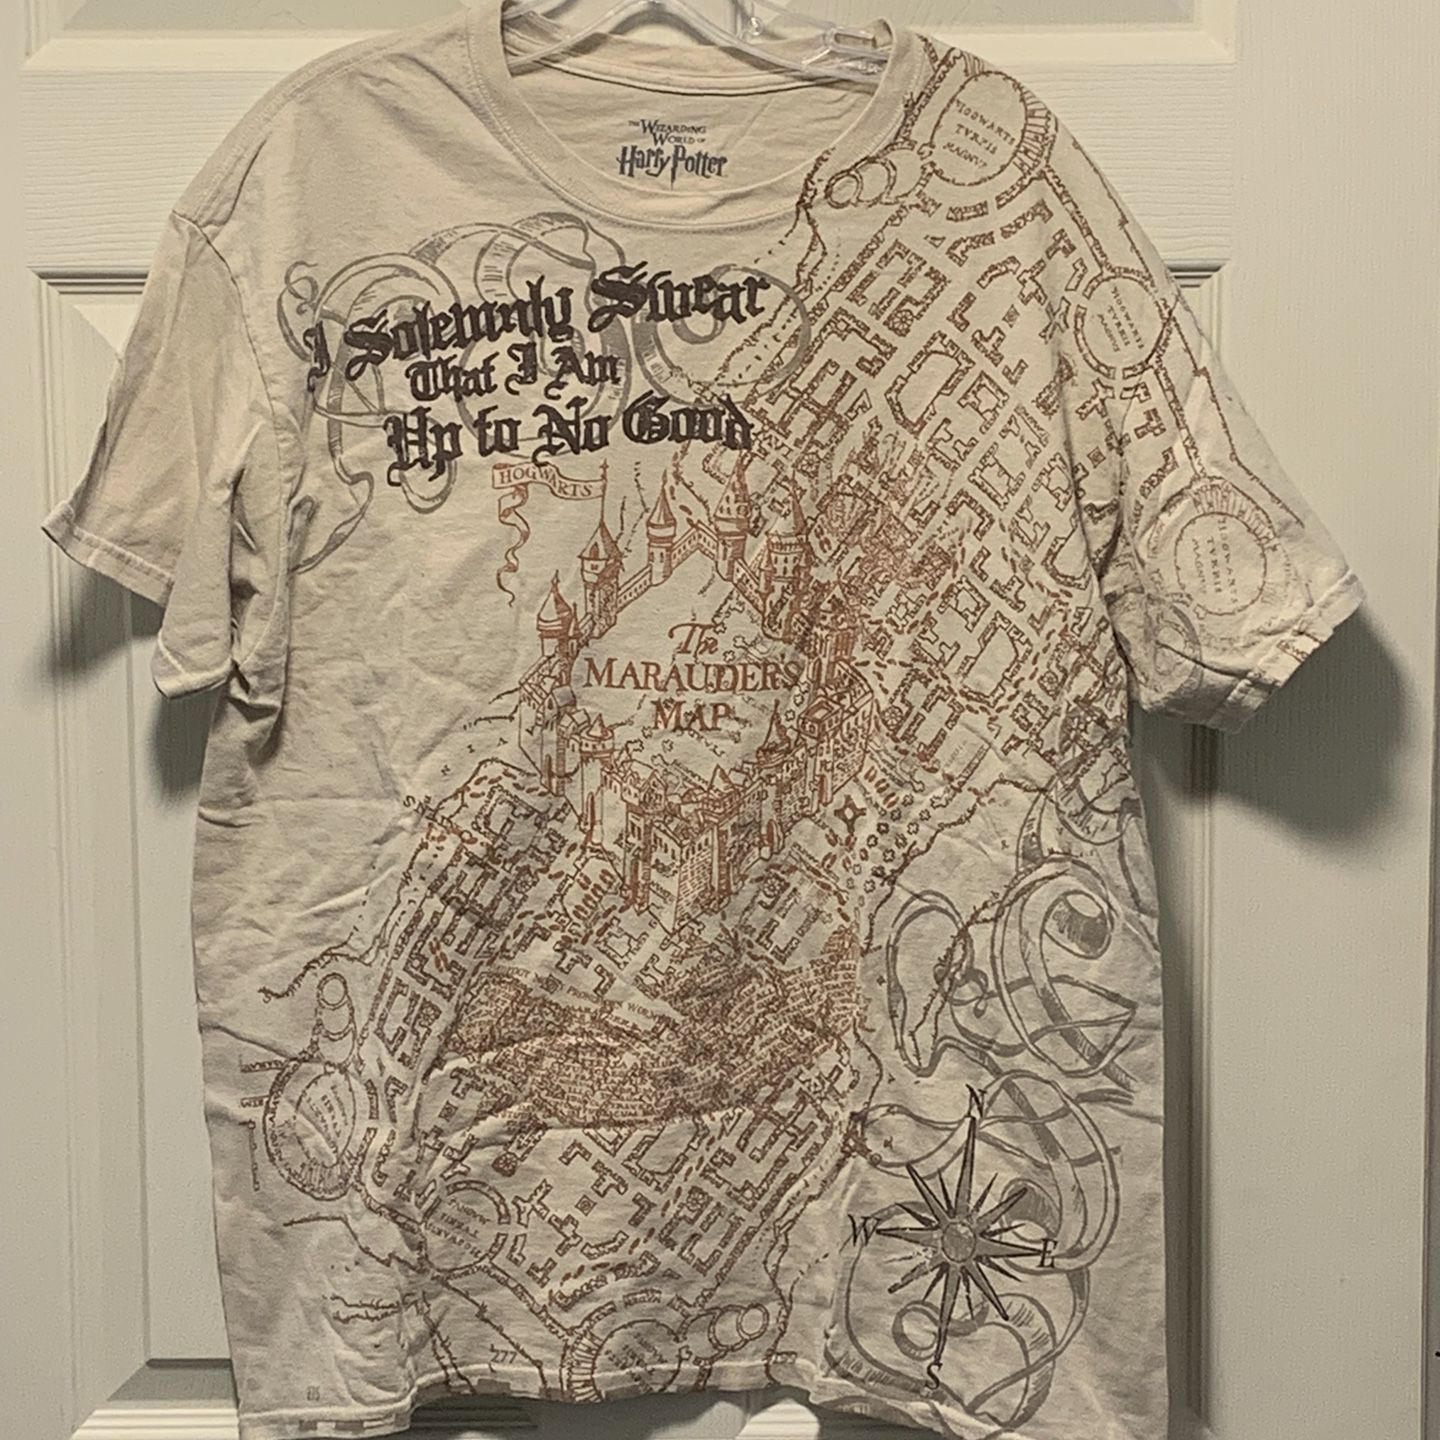 Marauders Map Harry Potter Shirt for Adults